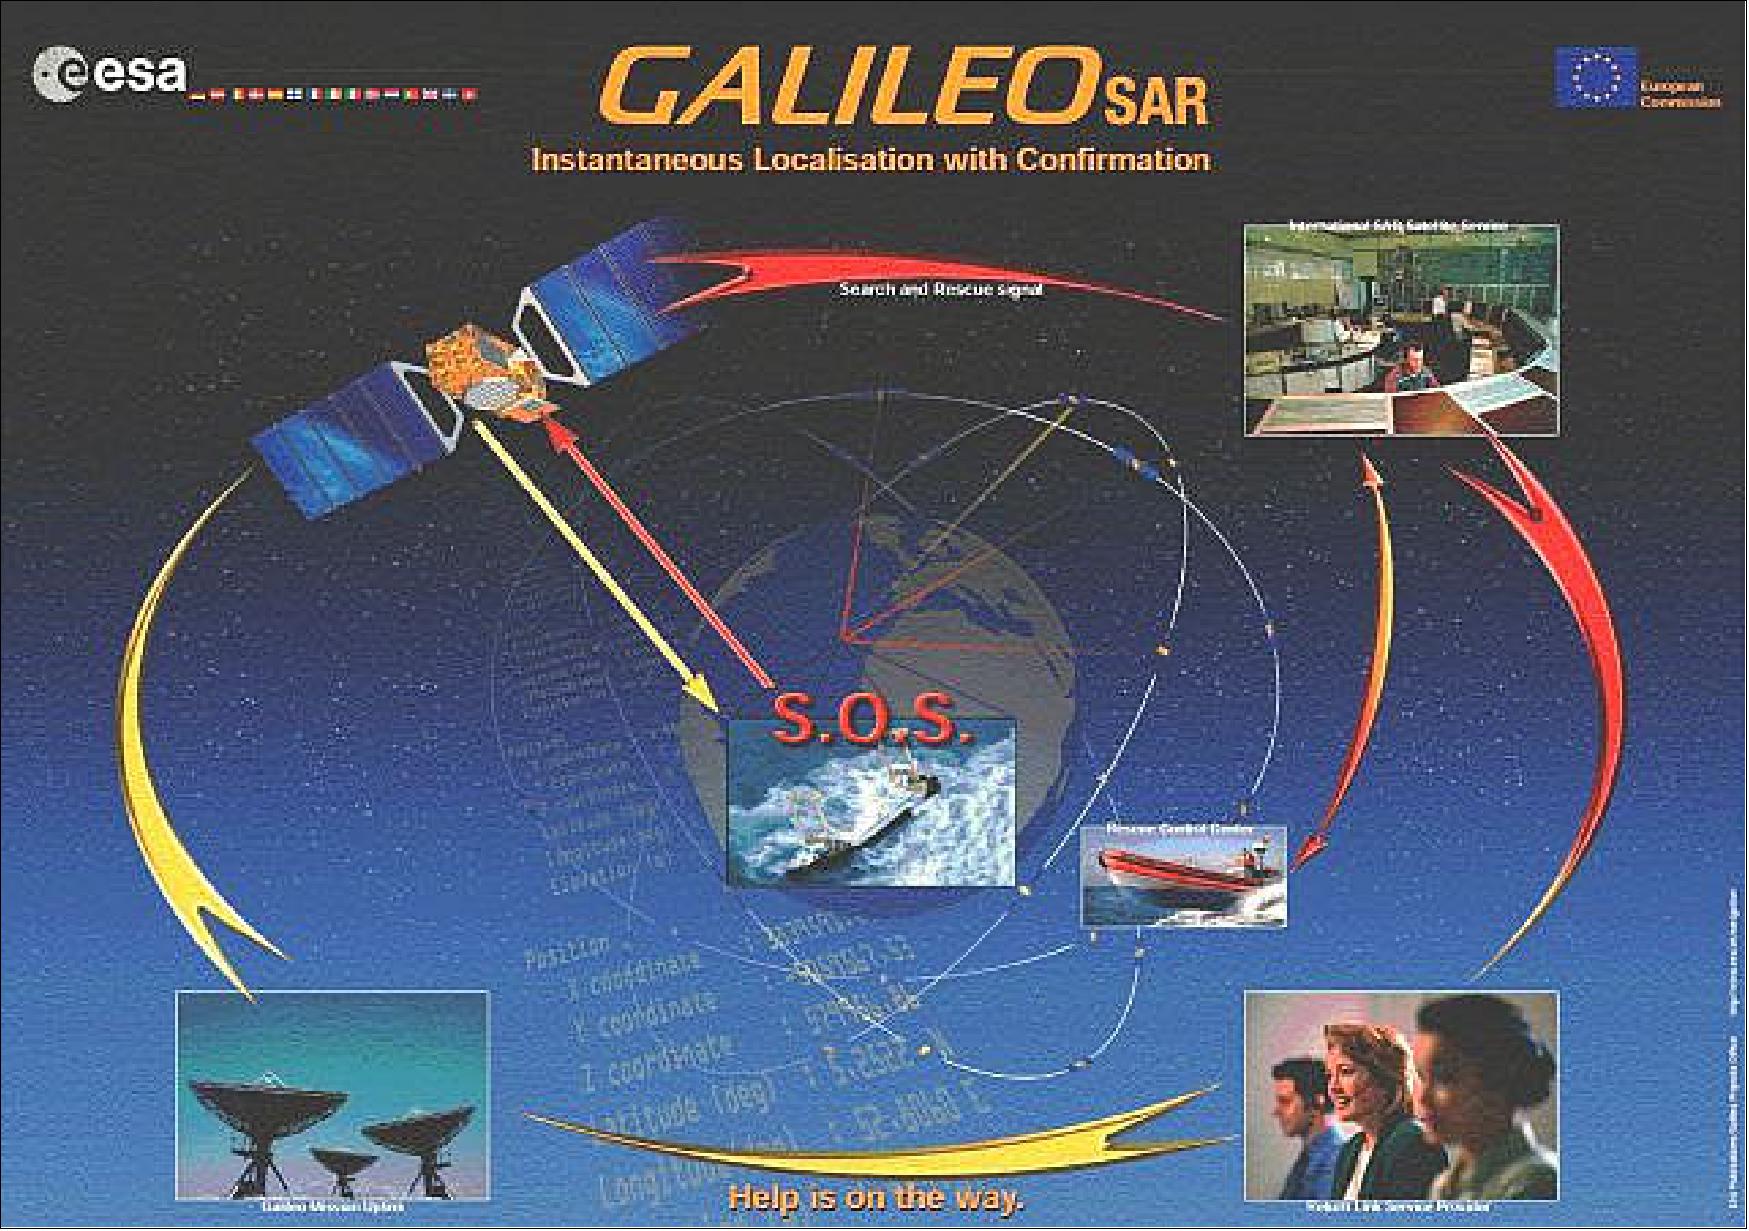 Figure 117: Overview of the Search And Rescue function within Galileo (image credit: ESA)